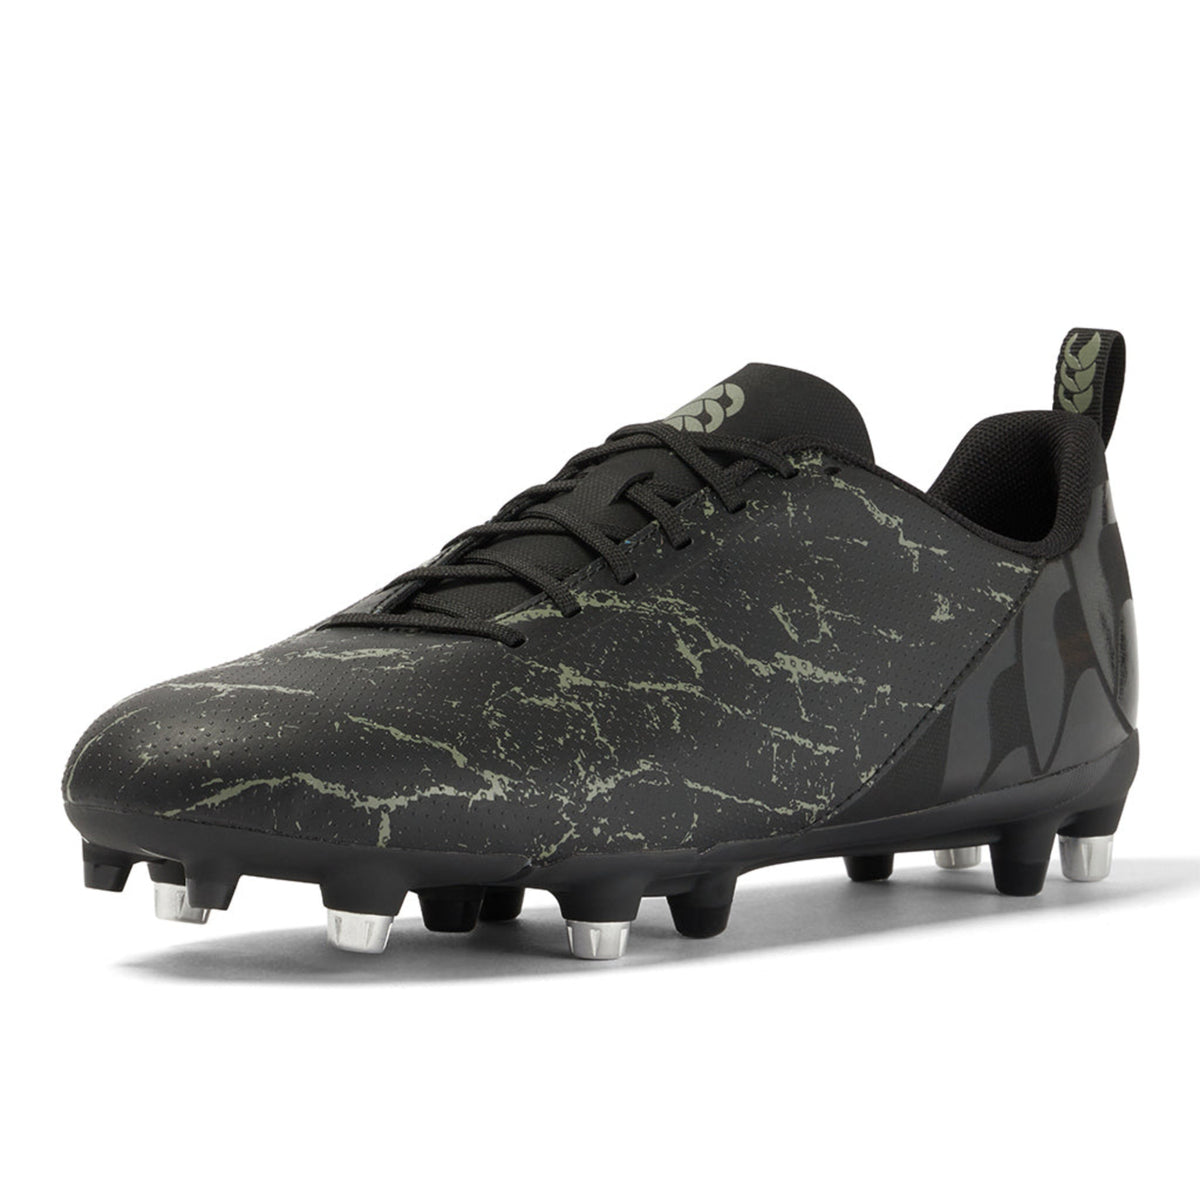 Canterbury Speed Team SG Rugby Boots - Adult Unisex - Black/Grey - The Rugby Shop The Rugby Shop UNISEX / BLACK/GREY / 6 TRS Distribution Canada Rugby Boots Canterbury Speed Team SG Rugby Boots - Adult Unisex - Black/Grey